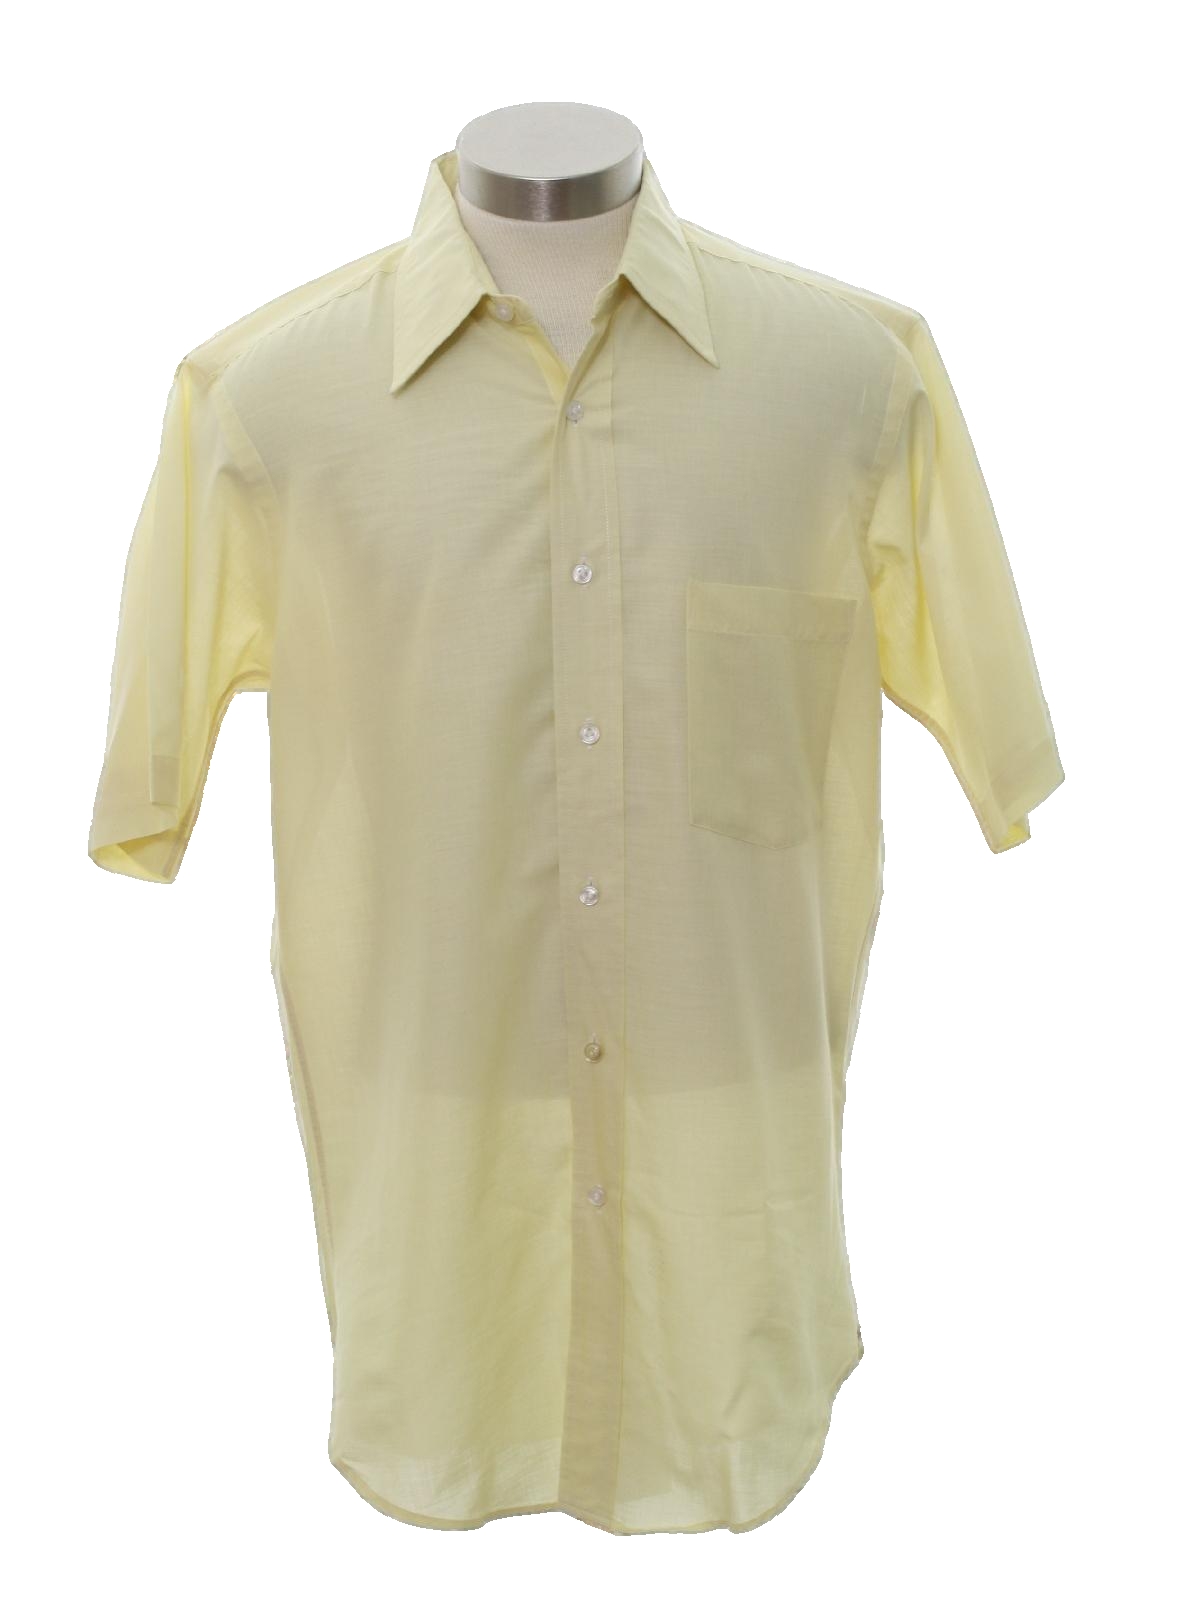 Vintage Hathaway Sixties Shirt: Late 60s -Hathaway- Mens pale yellow ...